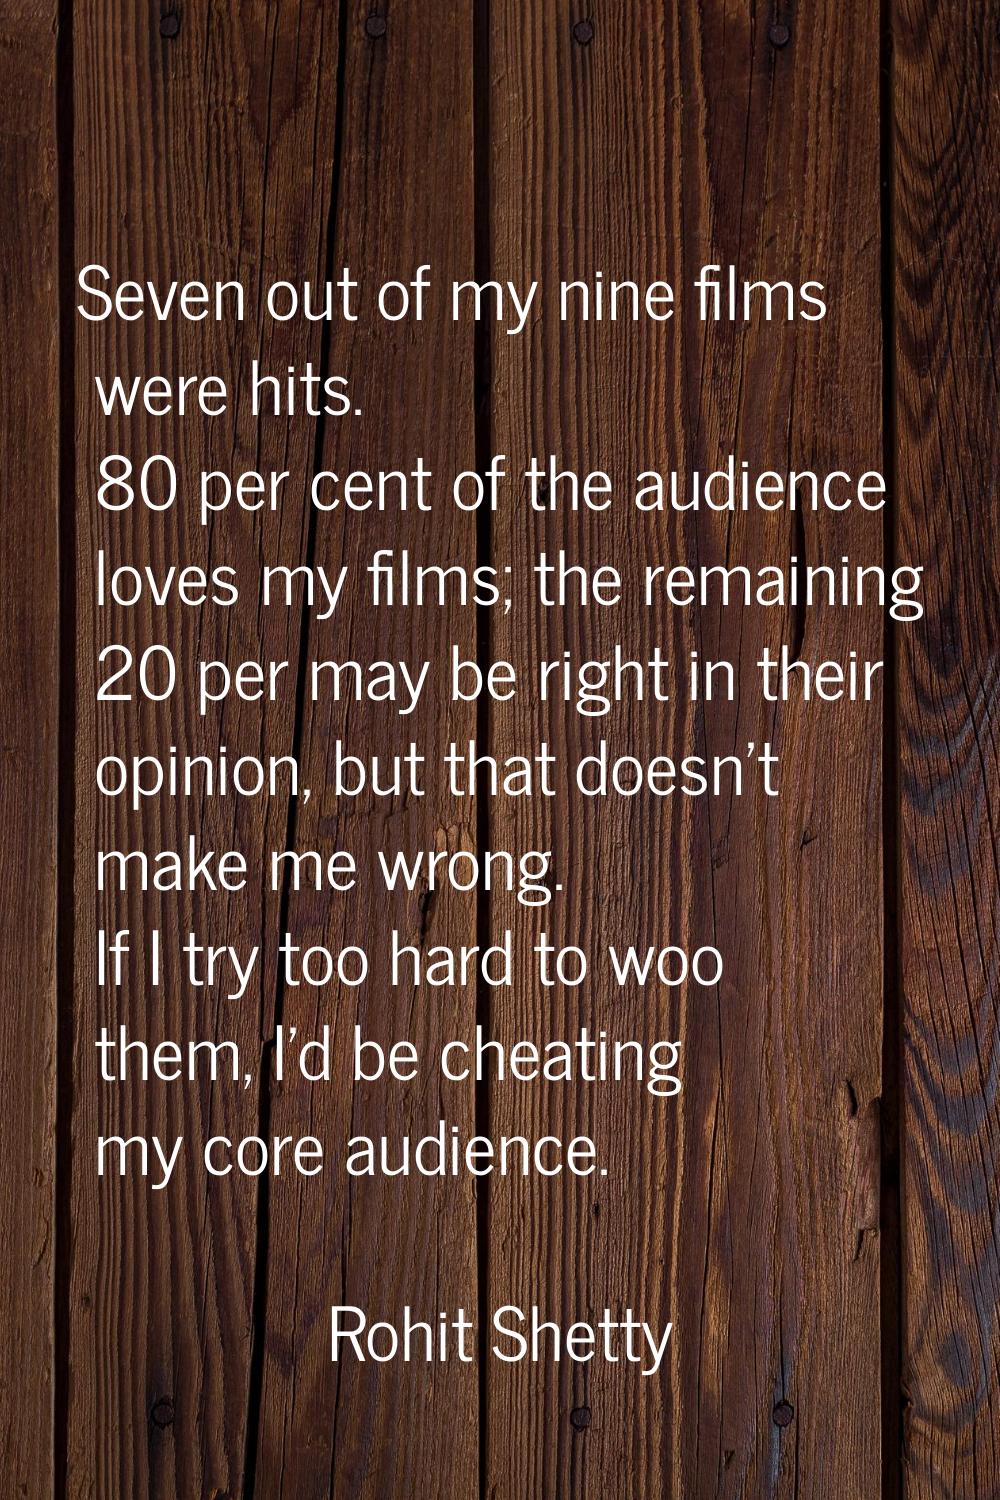 Seven out of my nine films were hits. 80 per cent of the audience loves my films; the remaining 20 